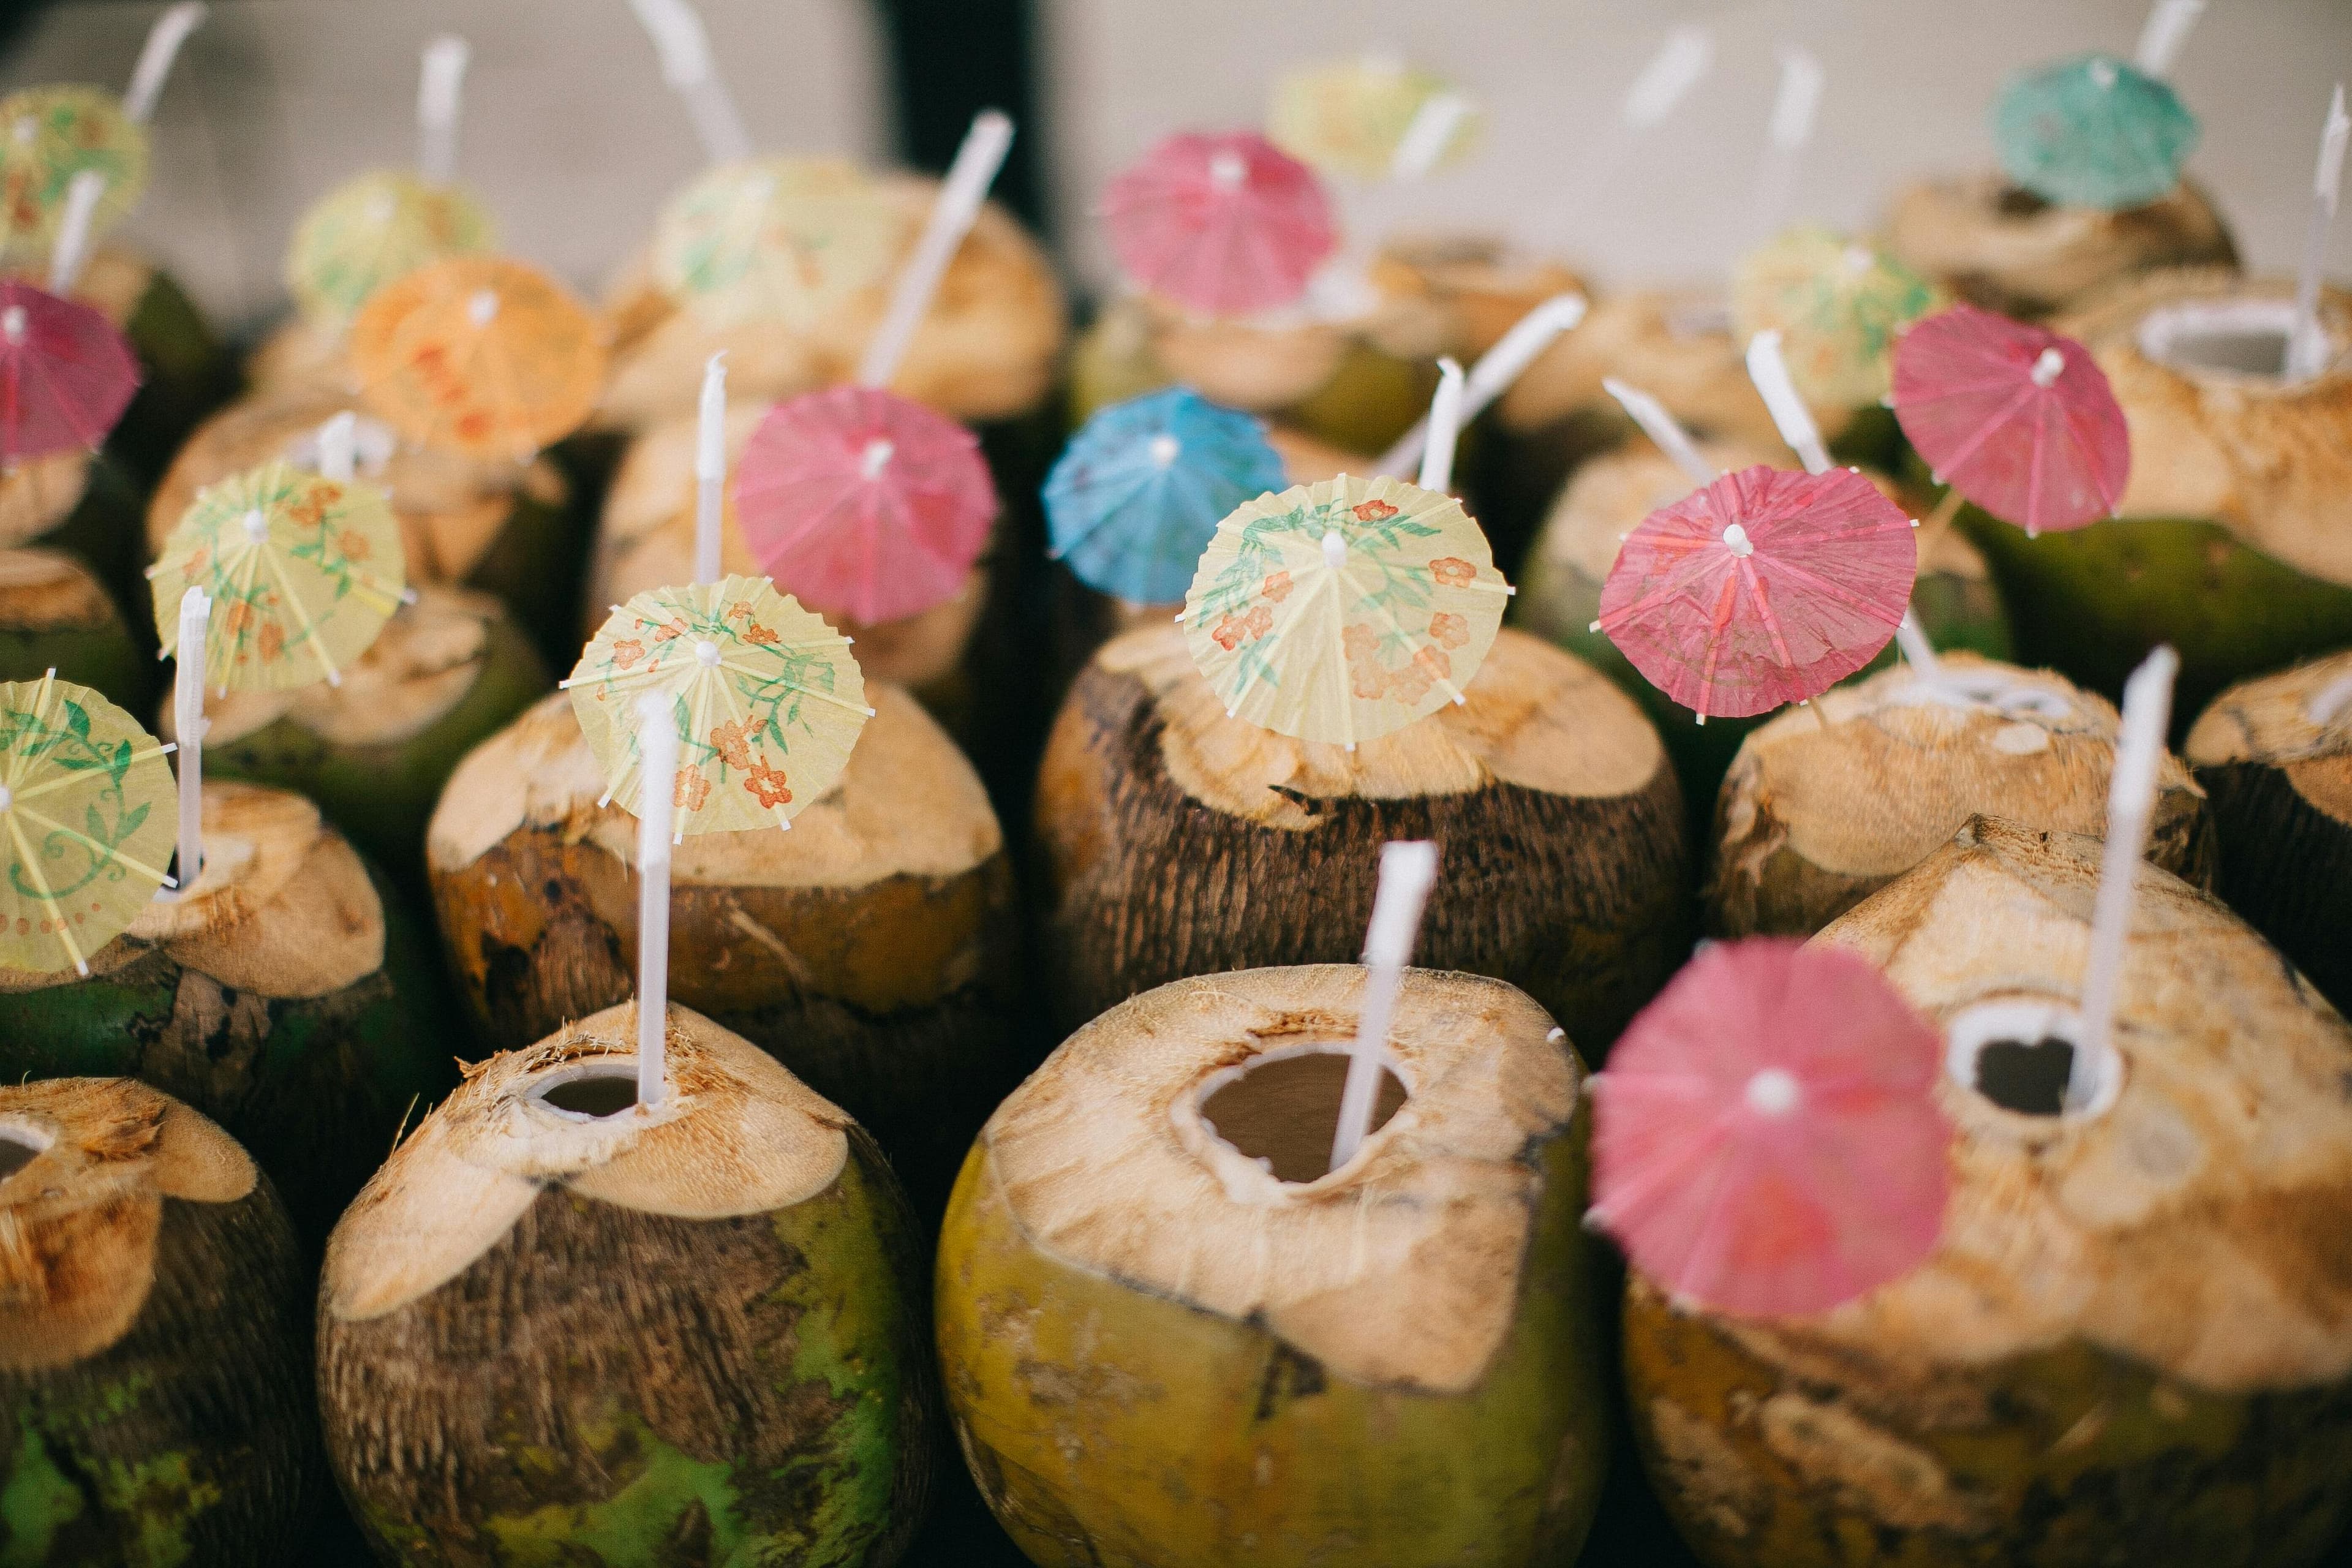 Coconut Water As A Hangover Remedy, Hydration Booster For Partygoers